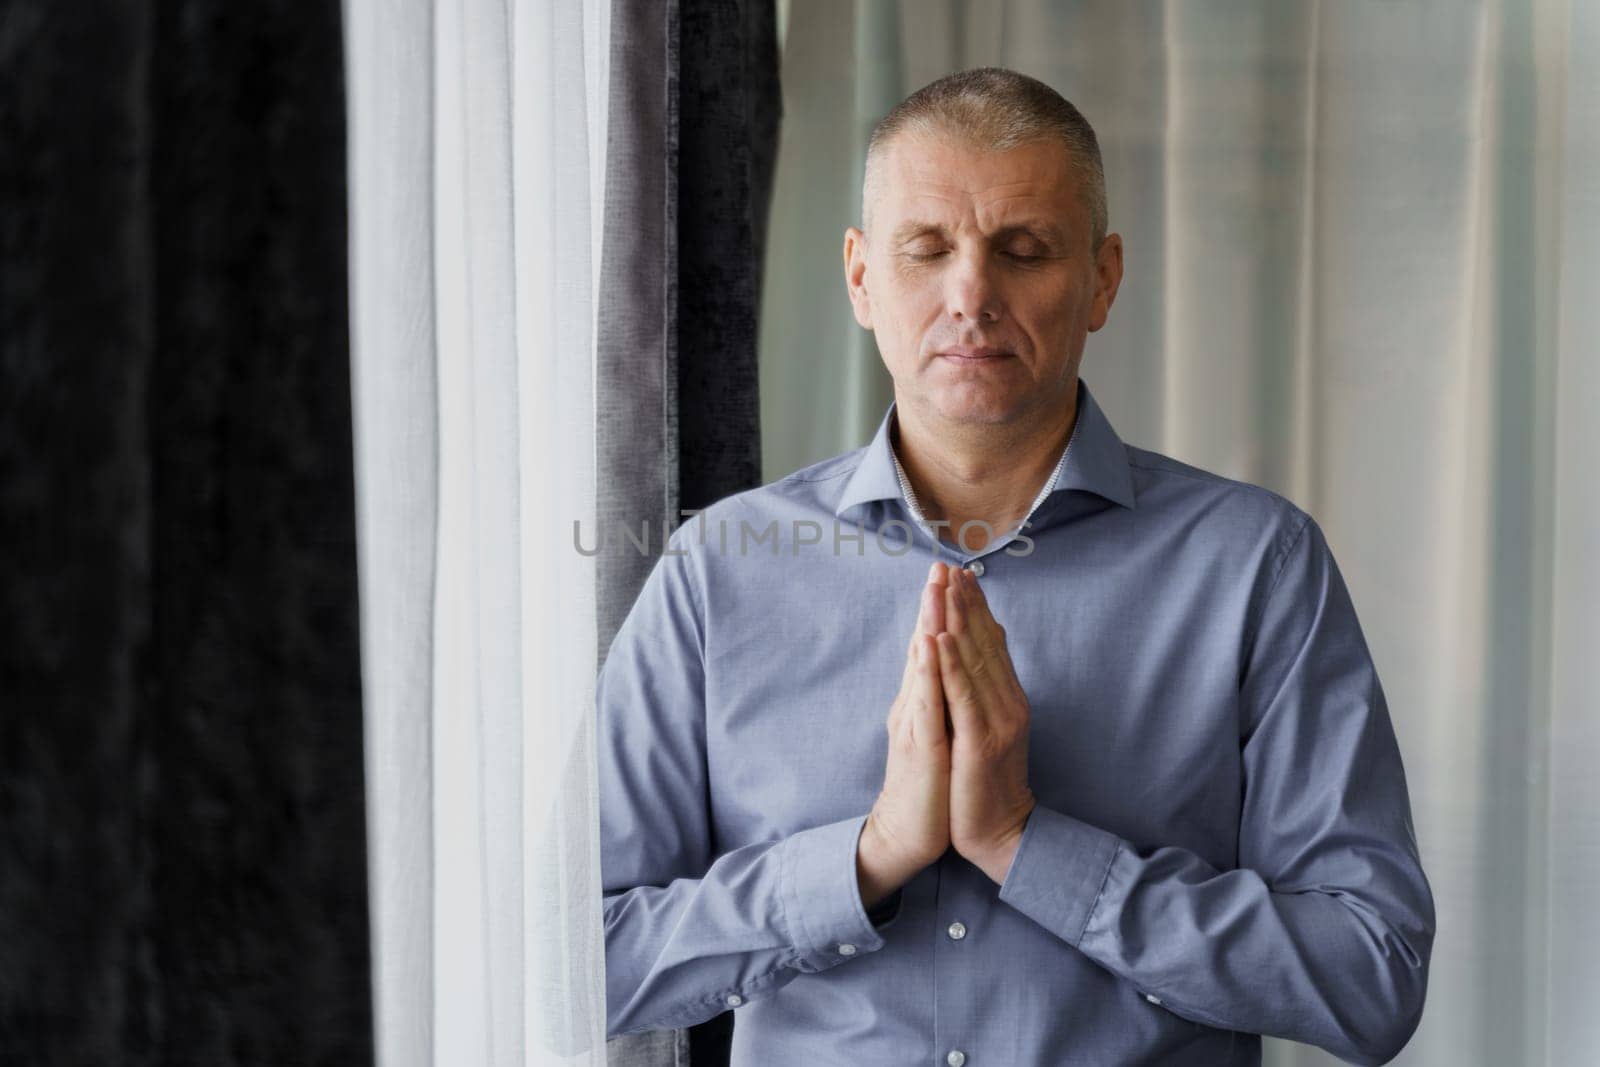 A man stands near the window doing relaxing breathing exercises. by Sd28DimoN_1976